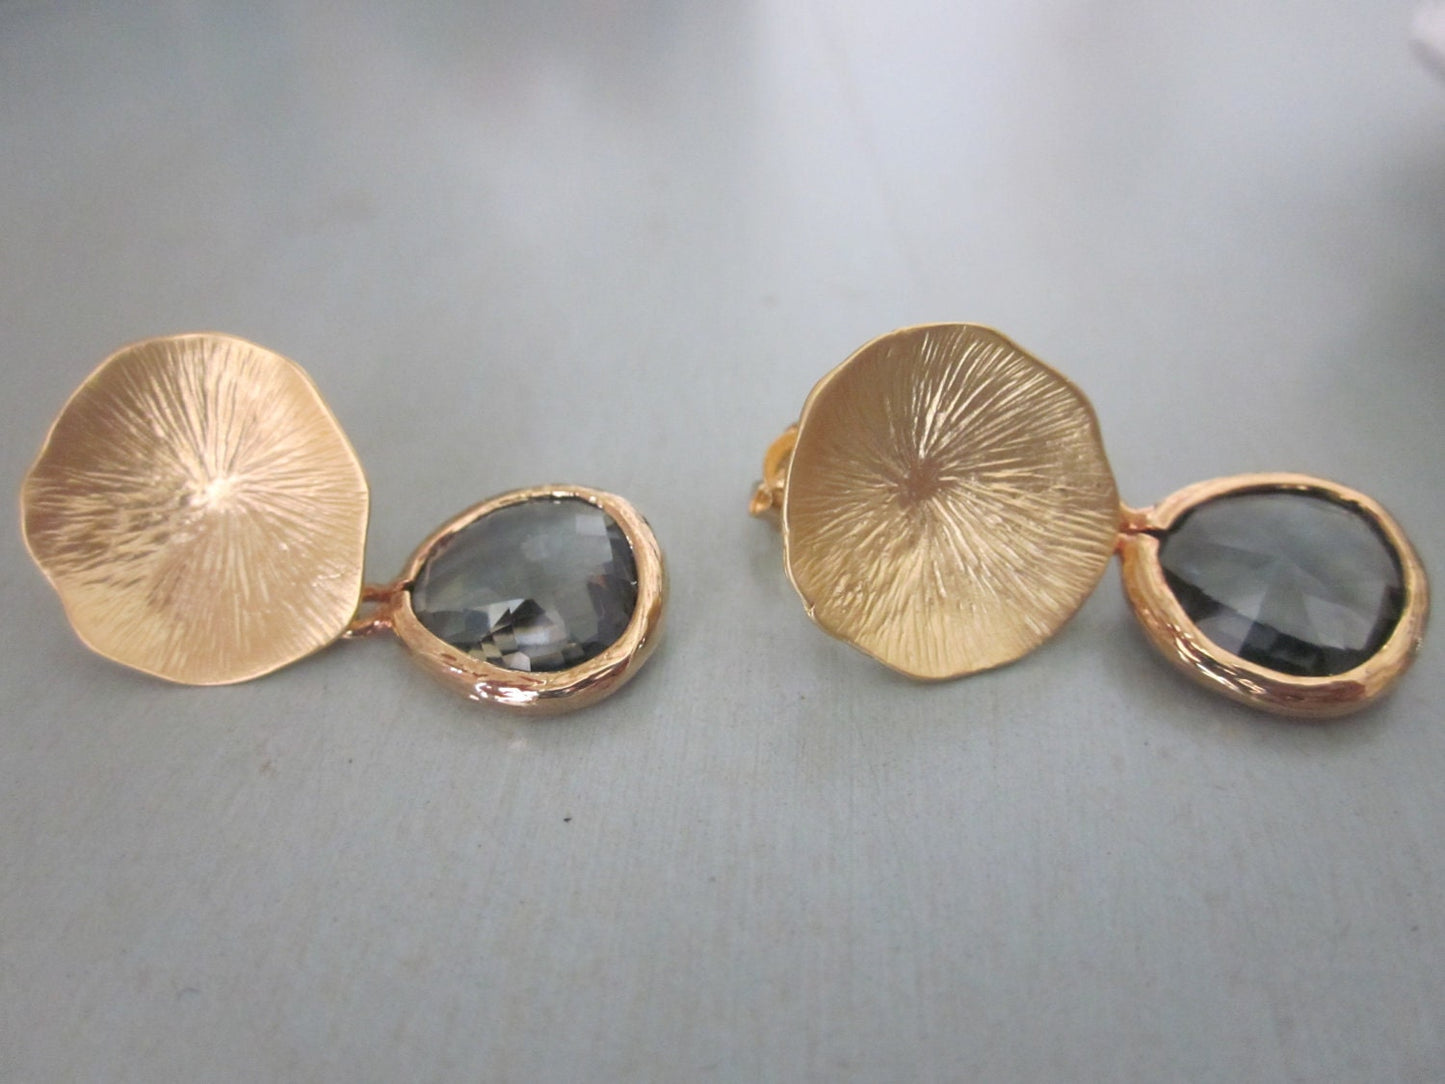 Charcoal Gray Earrings Gold Mushroom Coral Sterling Silver Post - Bridesmaid Earrings - Valentines Day Gift